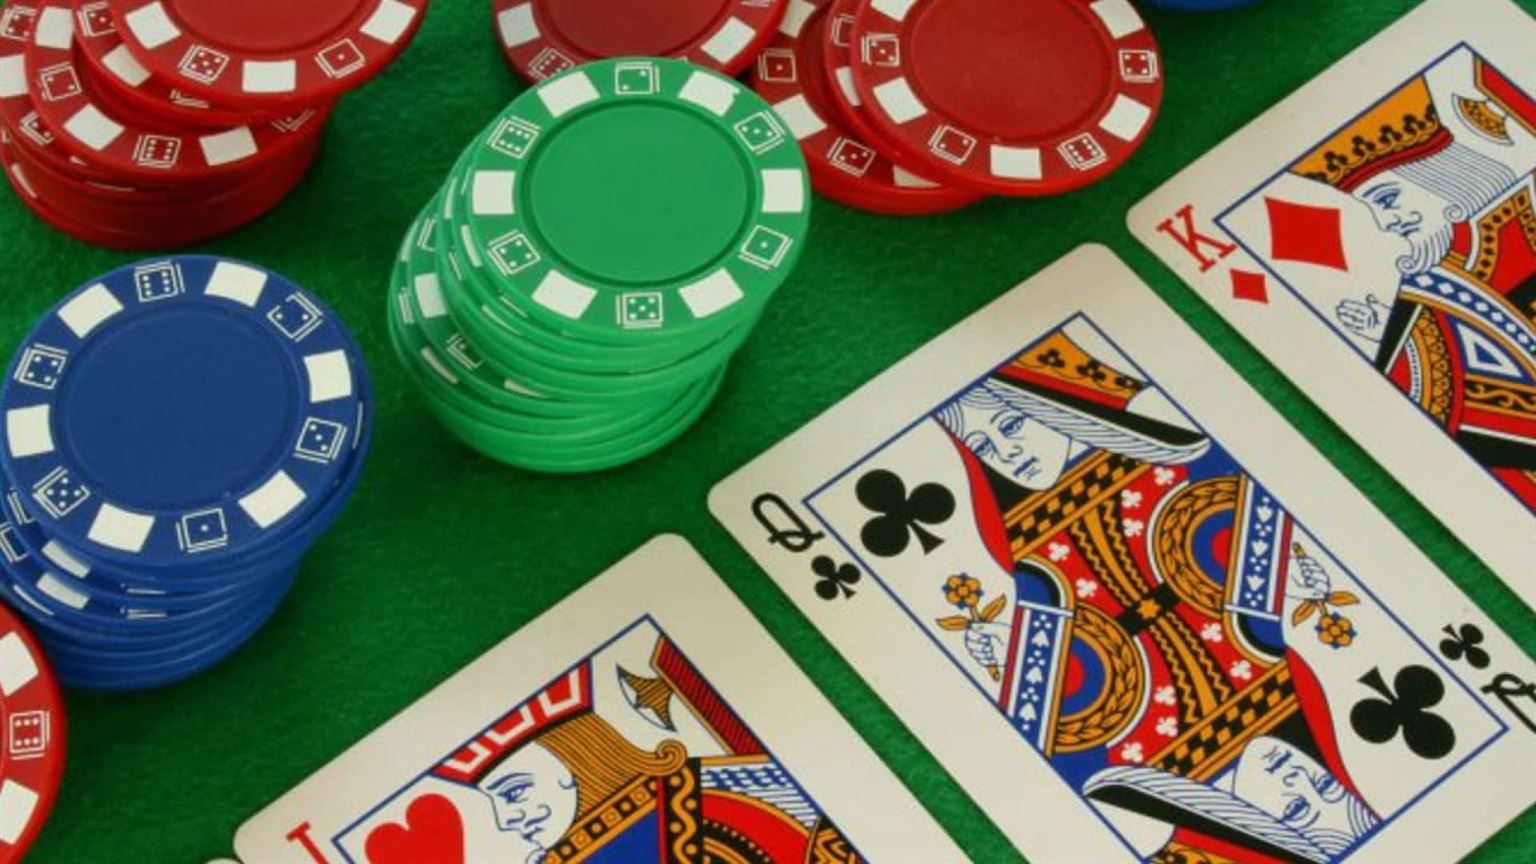 Strategic Seating: How to Choose the Perfect Poker Table